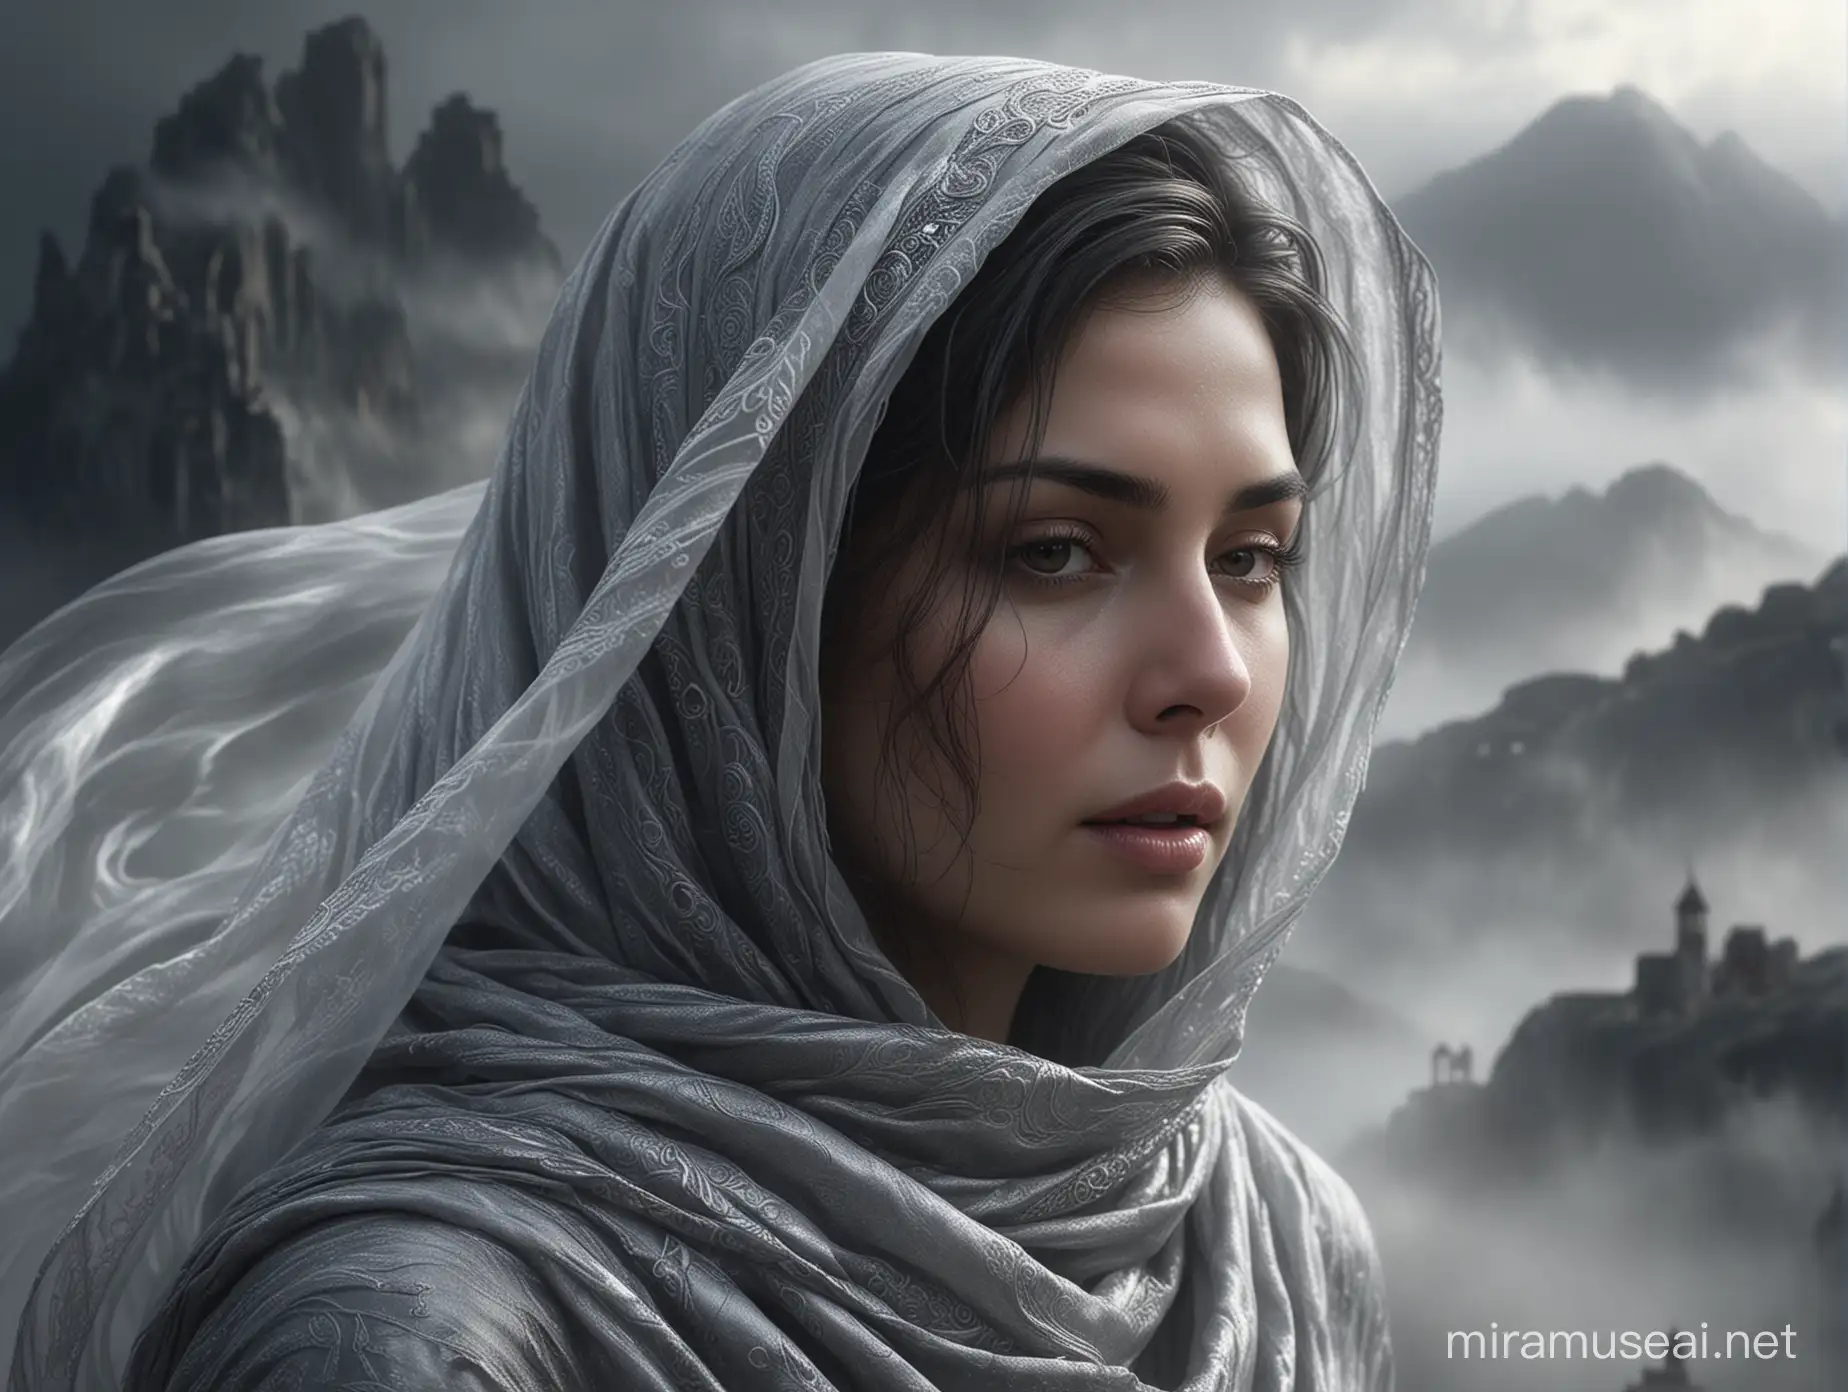 Mysterious Woman Veiled in Silver Scarf Amidst Swirling Mists